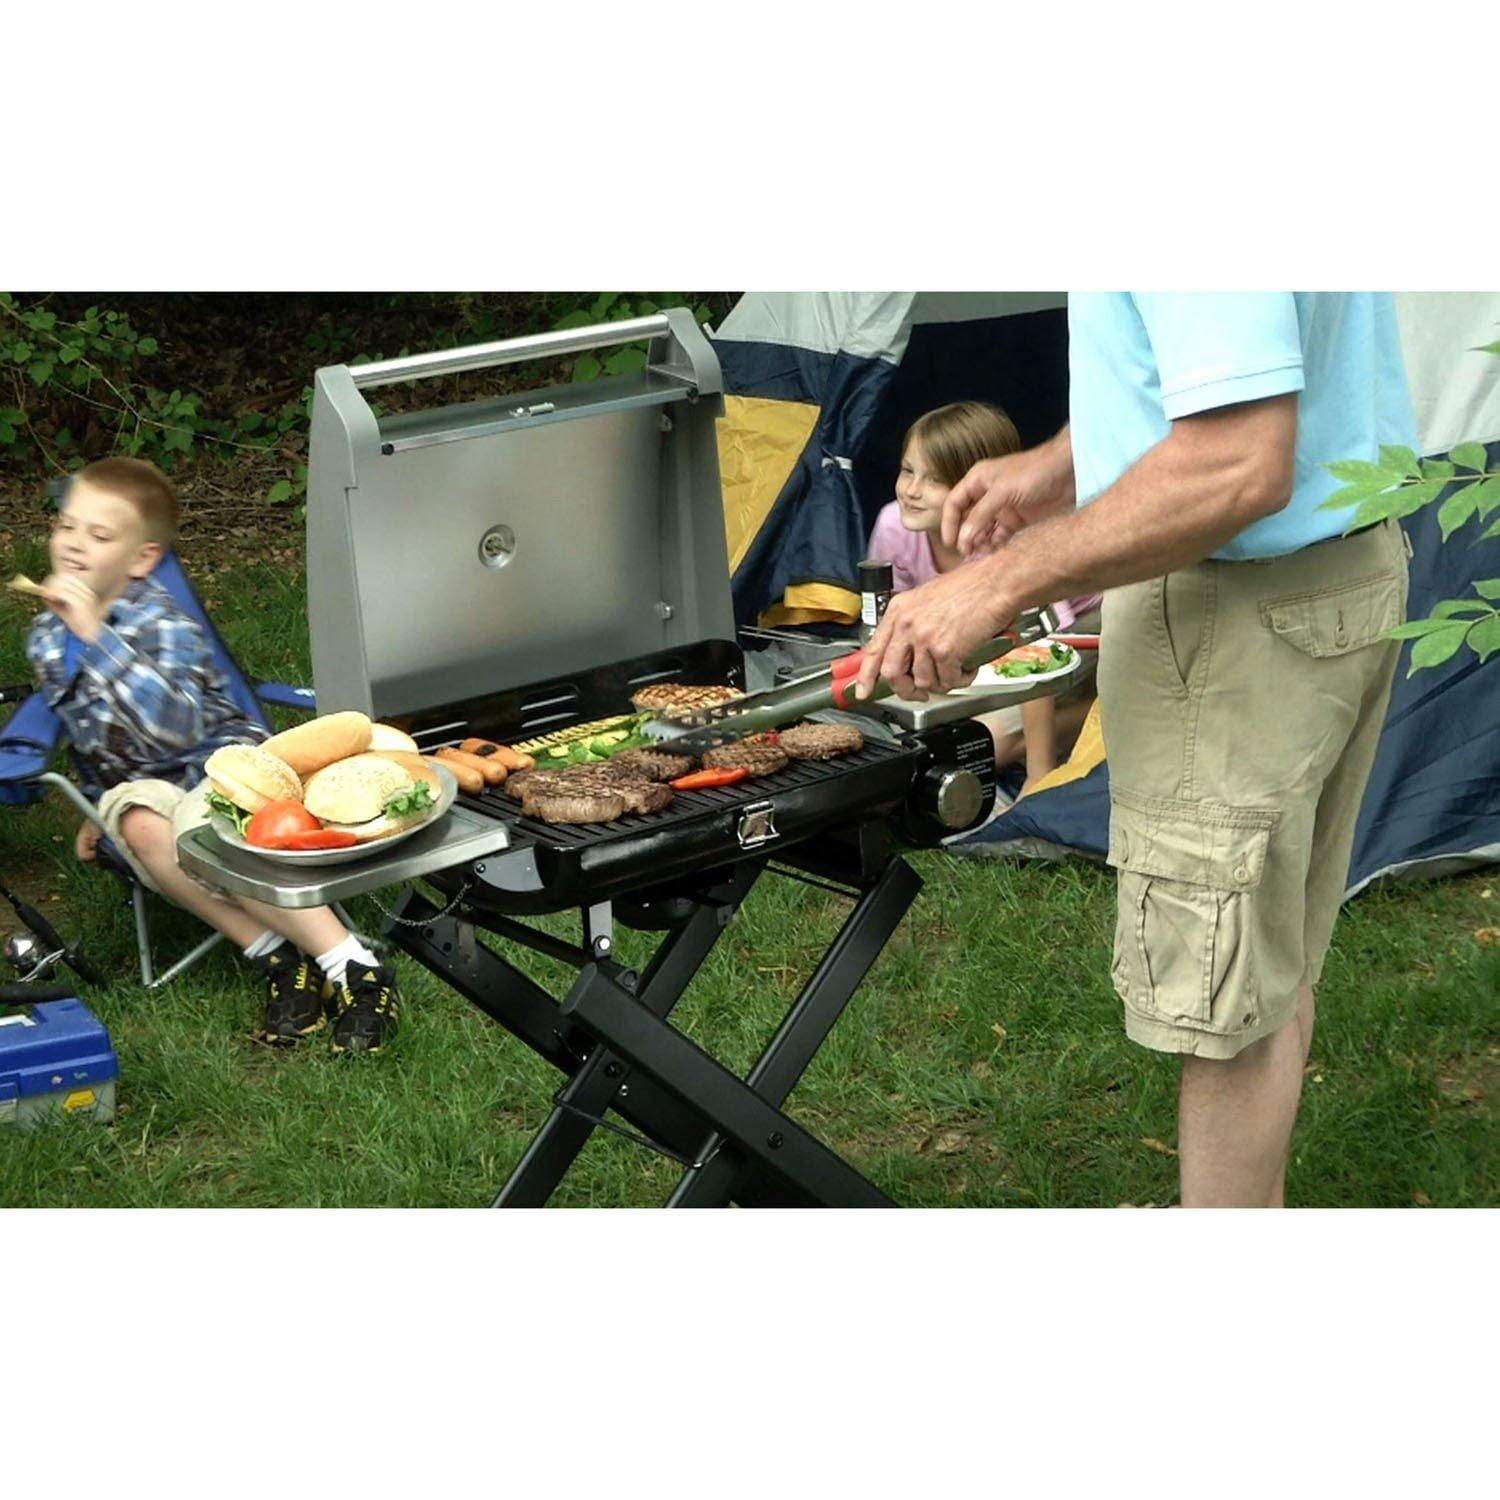 Cuisinart Venture Portable GAS Grill - Red